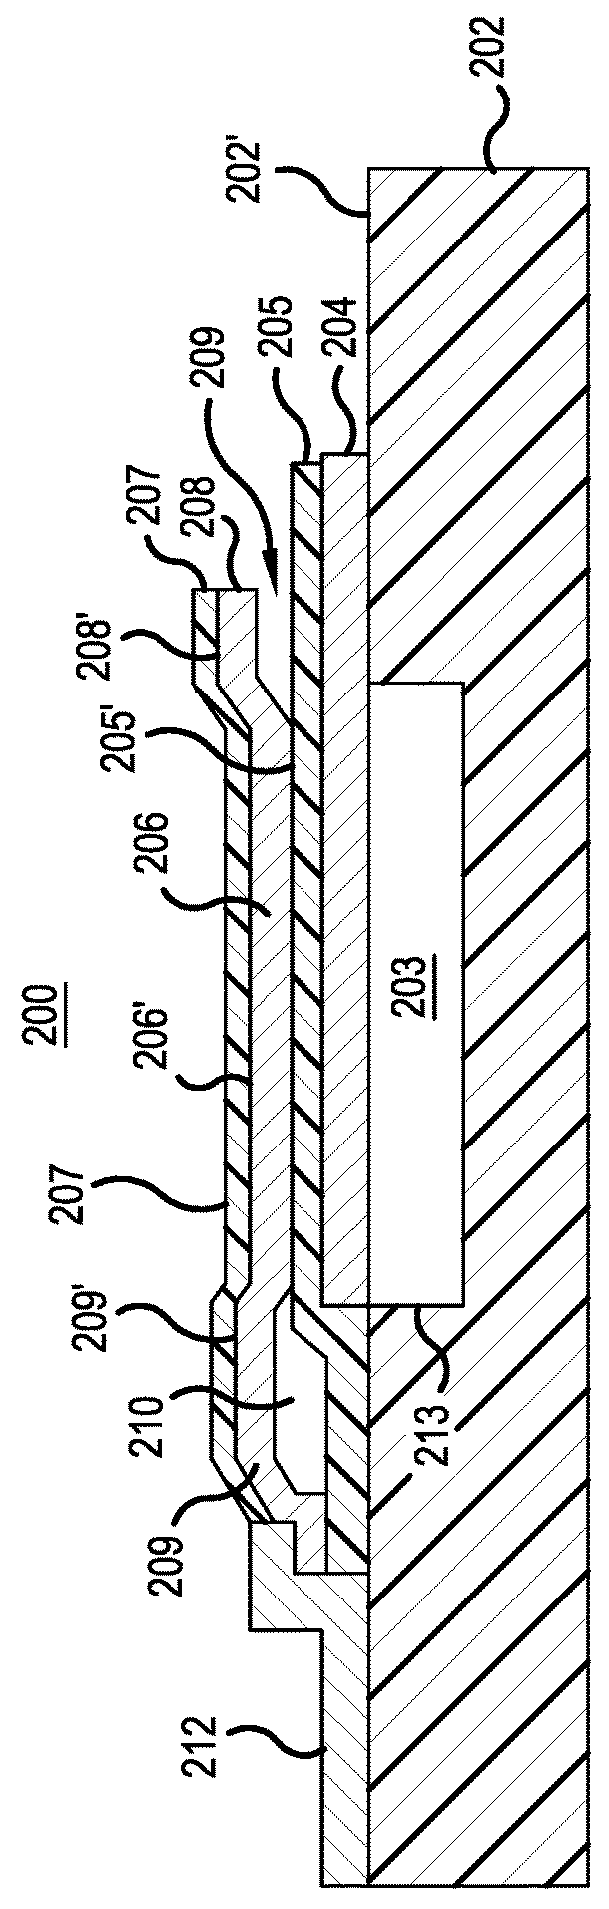 Packaged resonator with polymeric air cavity package